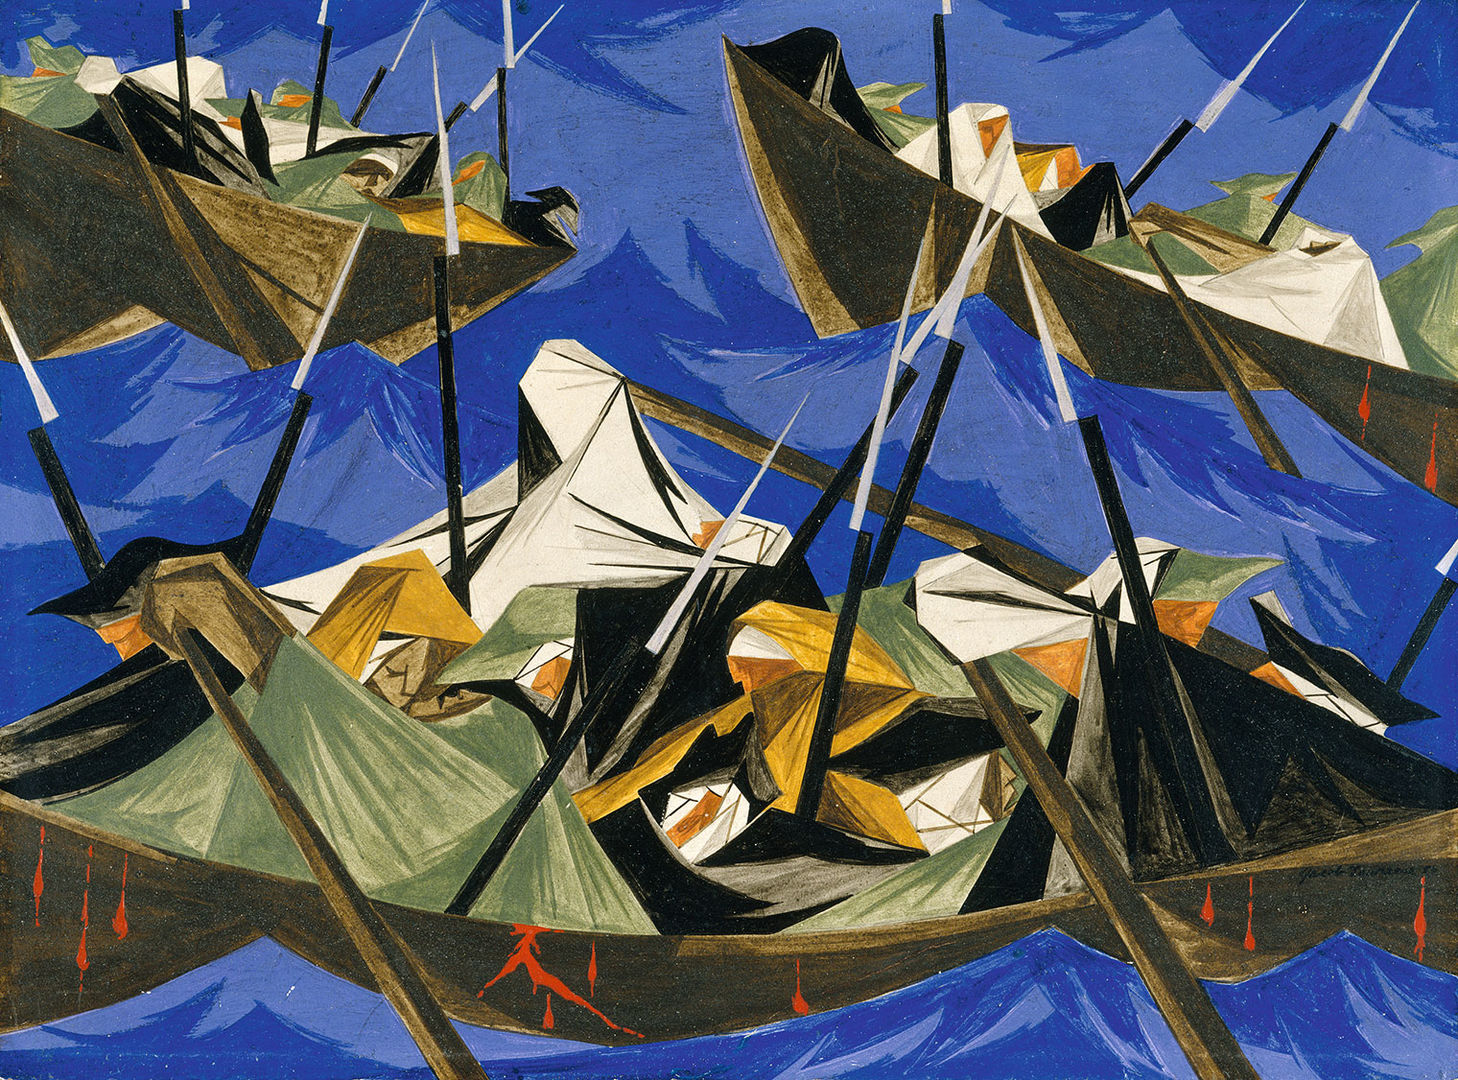 A painting of several boats fording a river